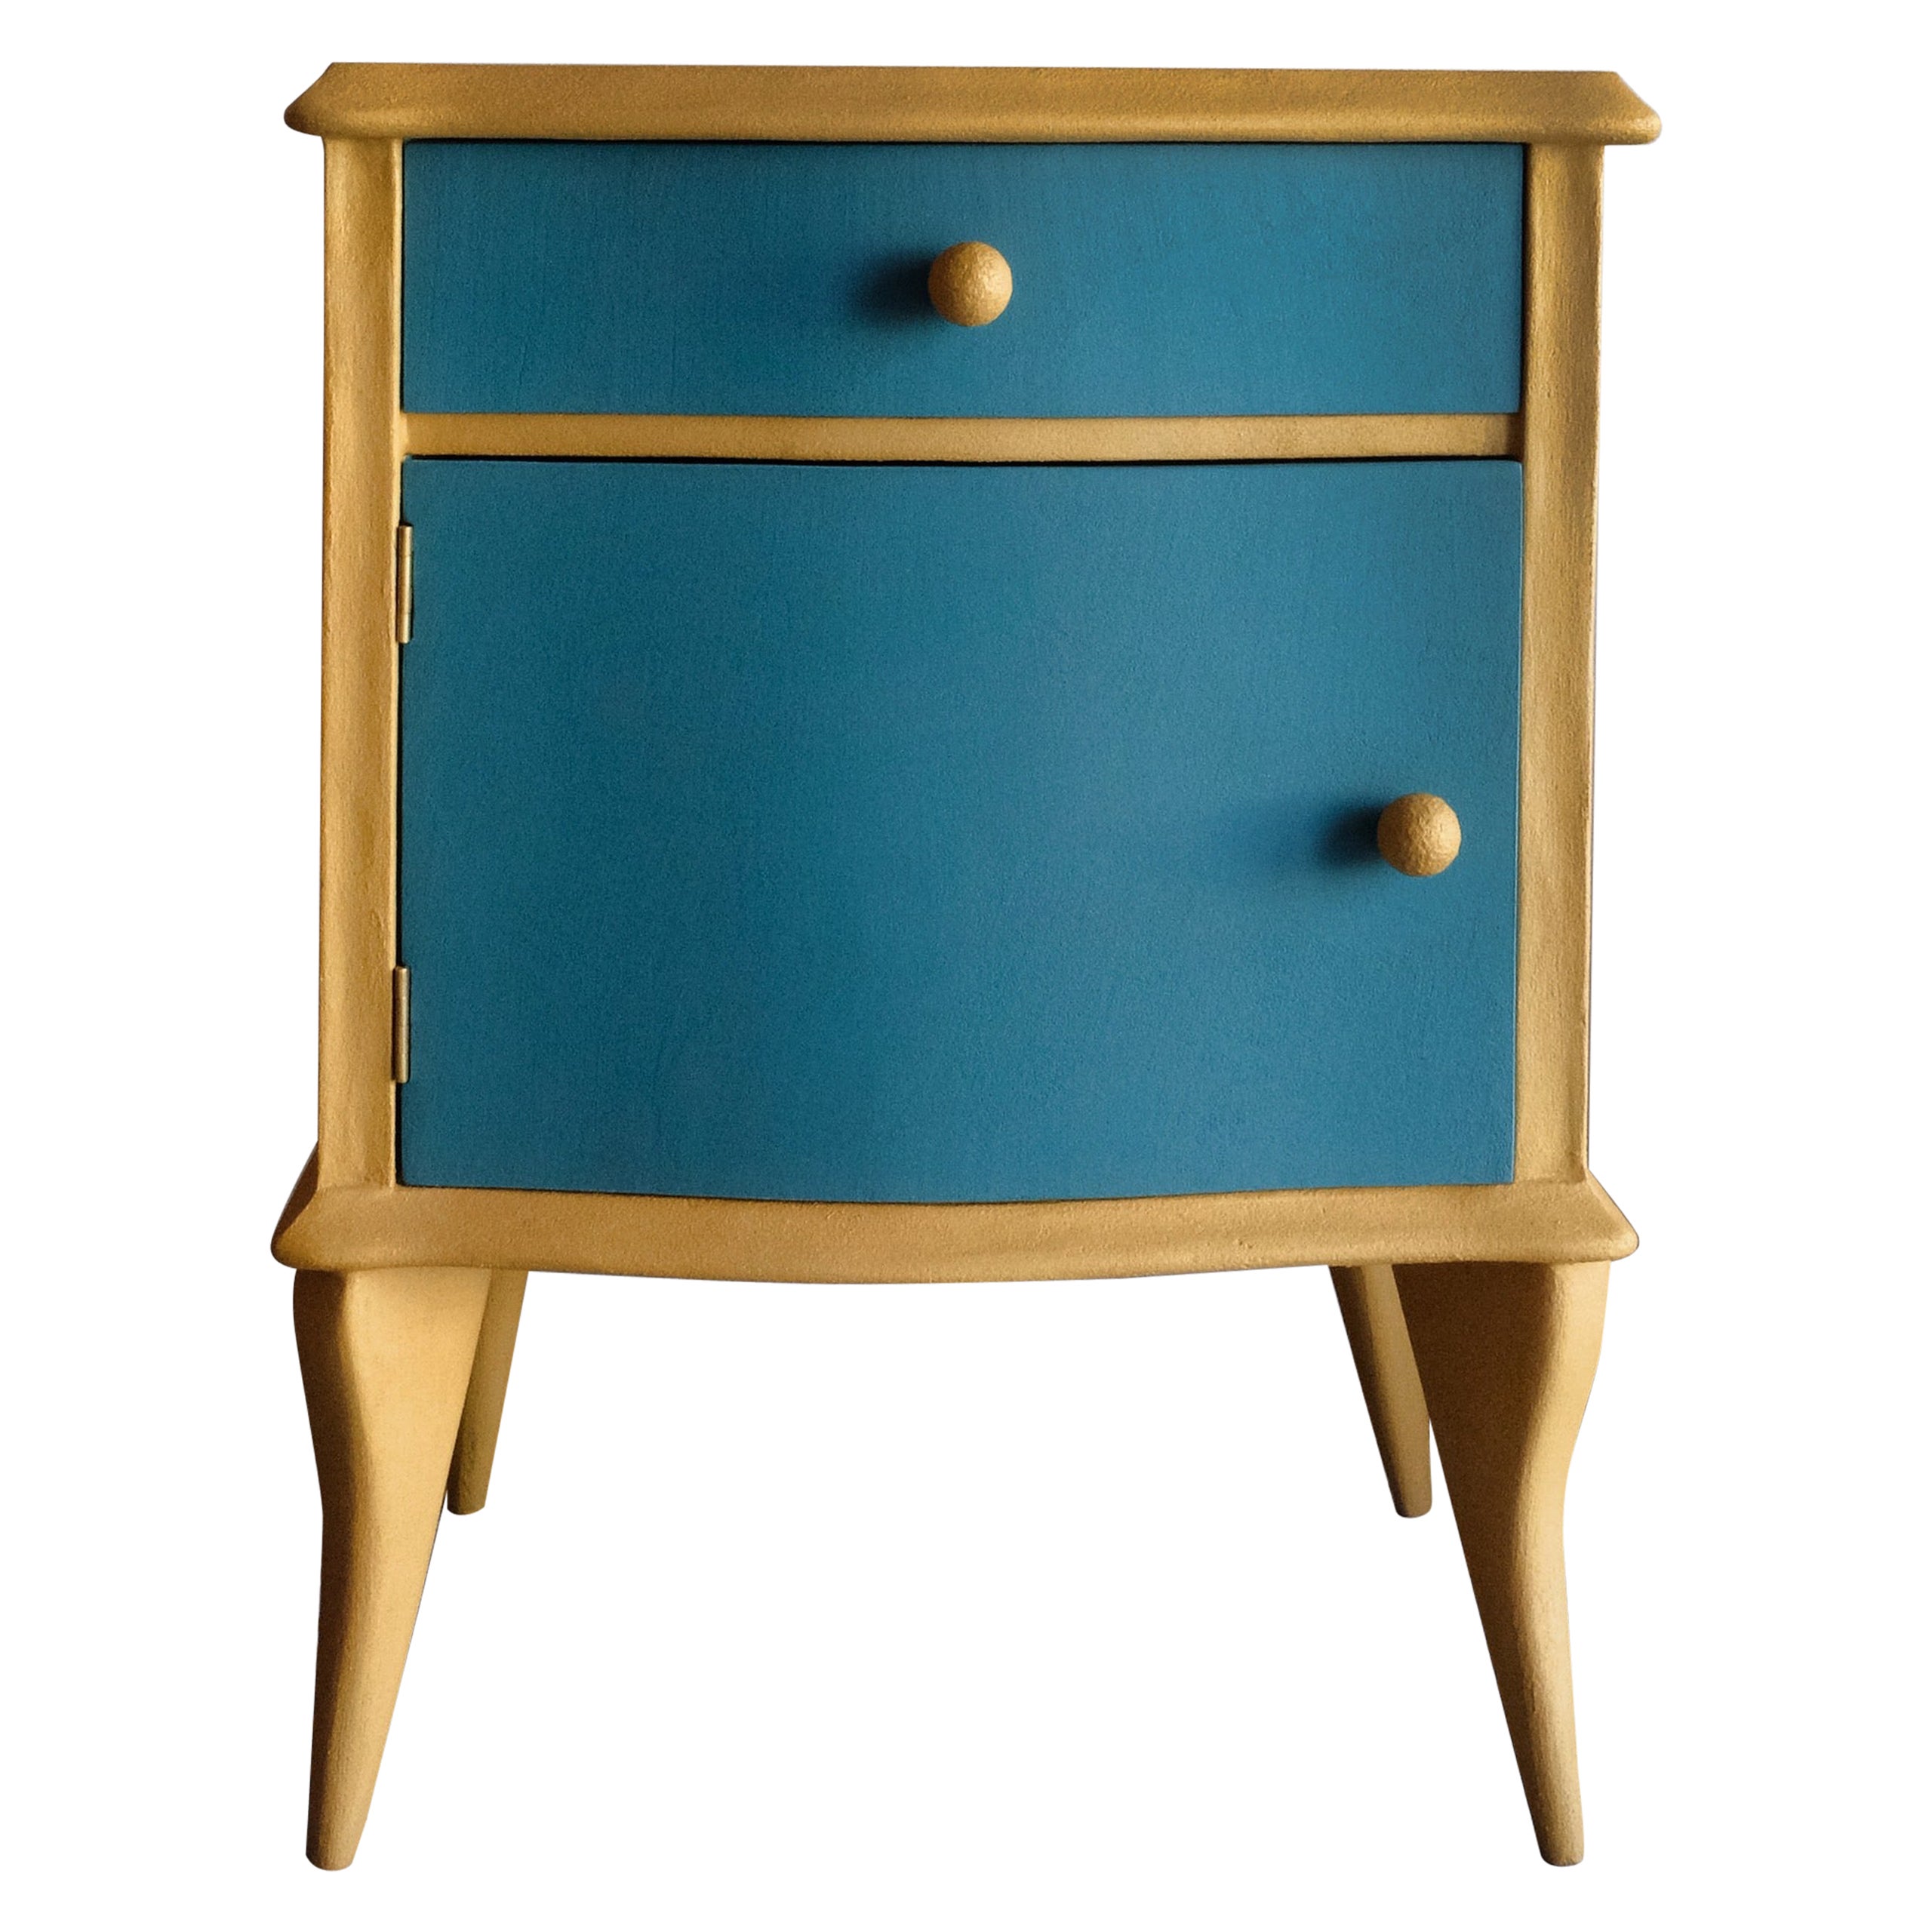 21st Century Cabinet-Sculpture Contemporary Gold-Blue Colors in Wood and Resin